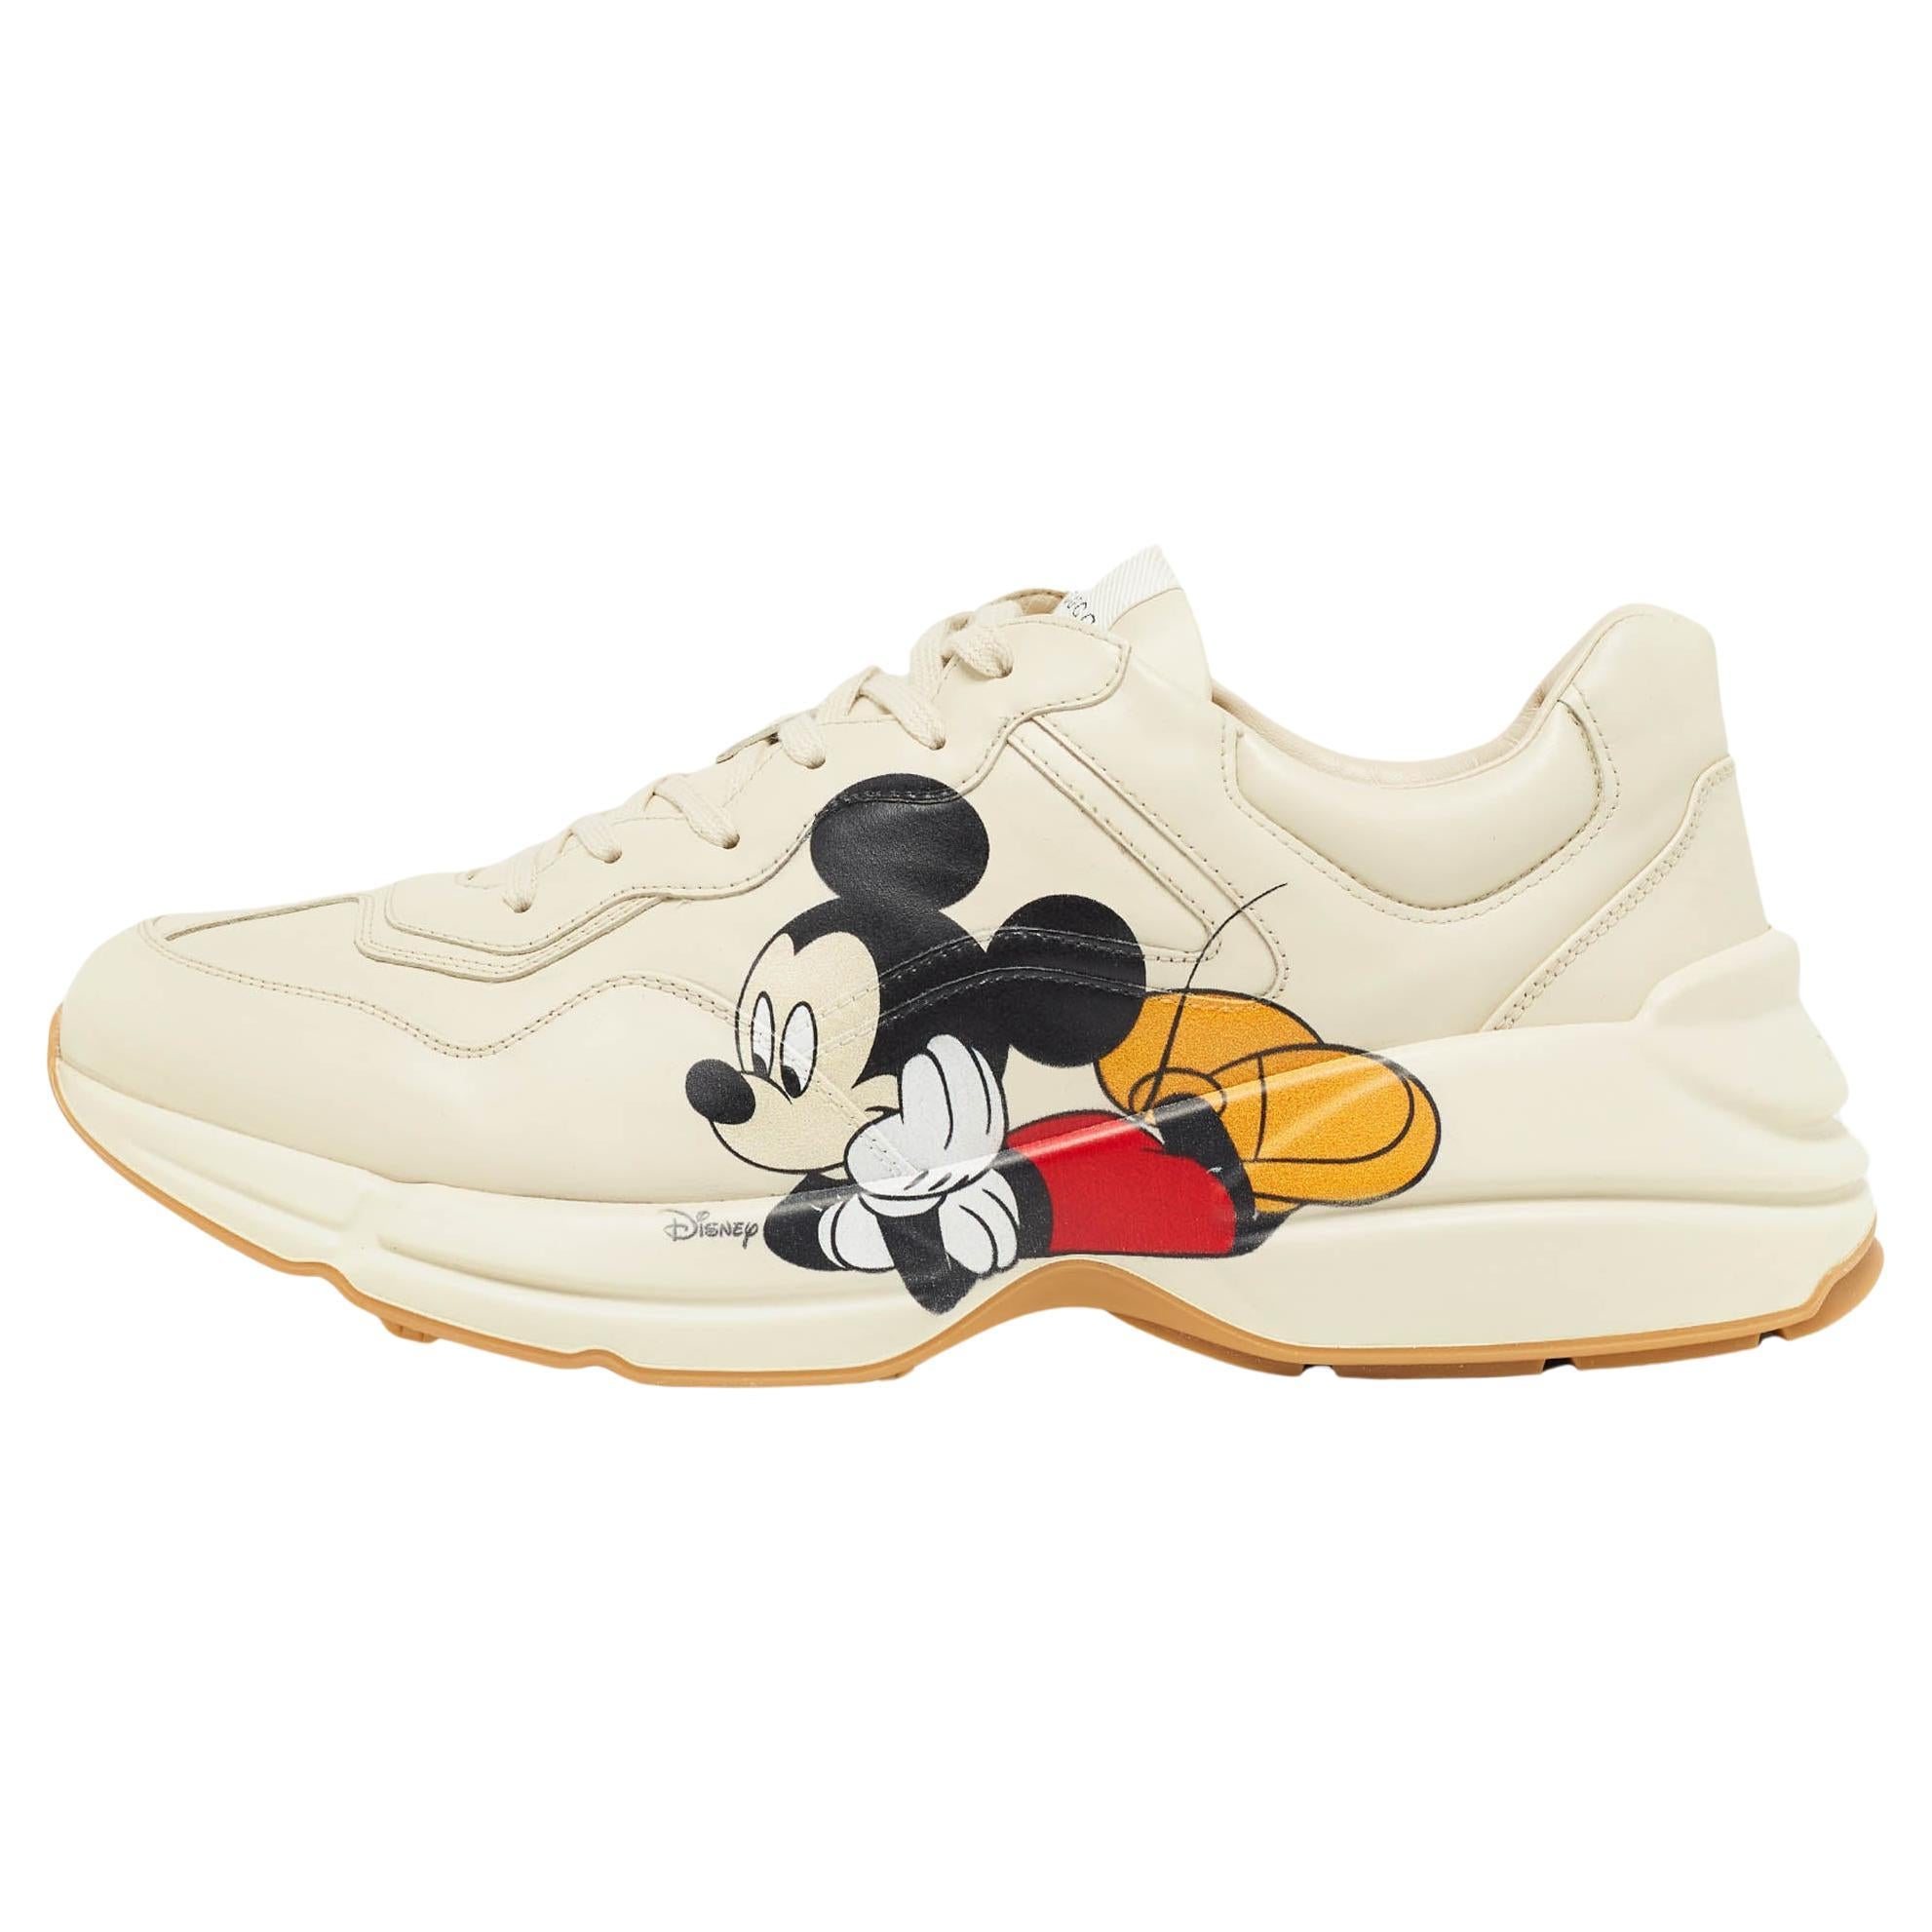 Gucci x Disney Cream Leather Mickey Mouse Rhyton Sneakers Size 47 For Sale